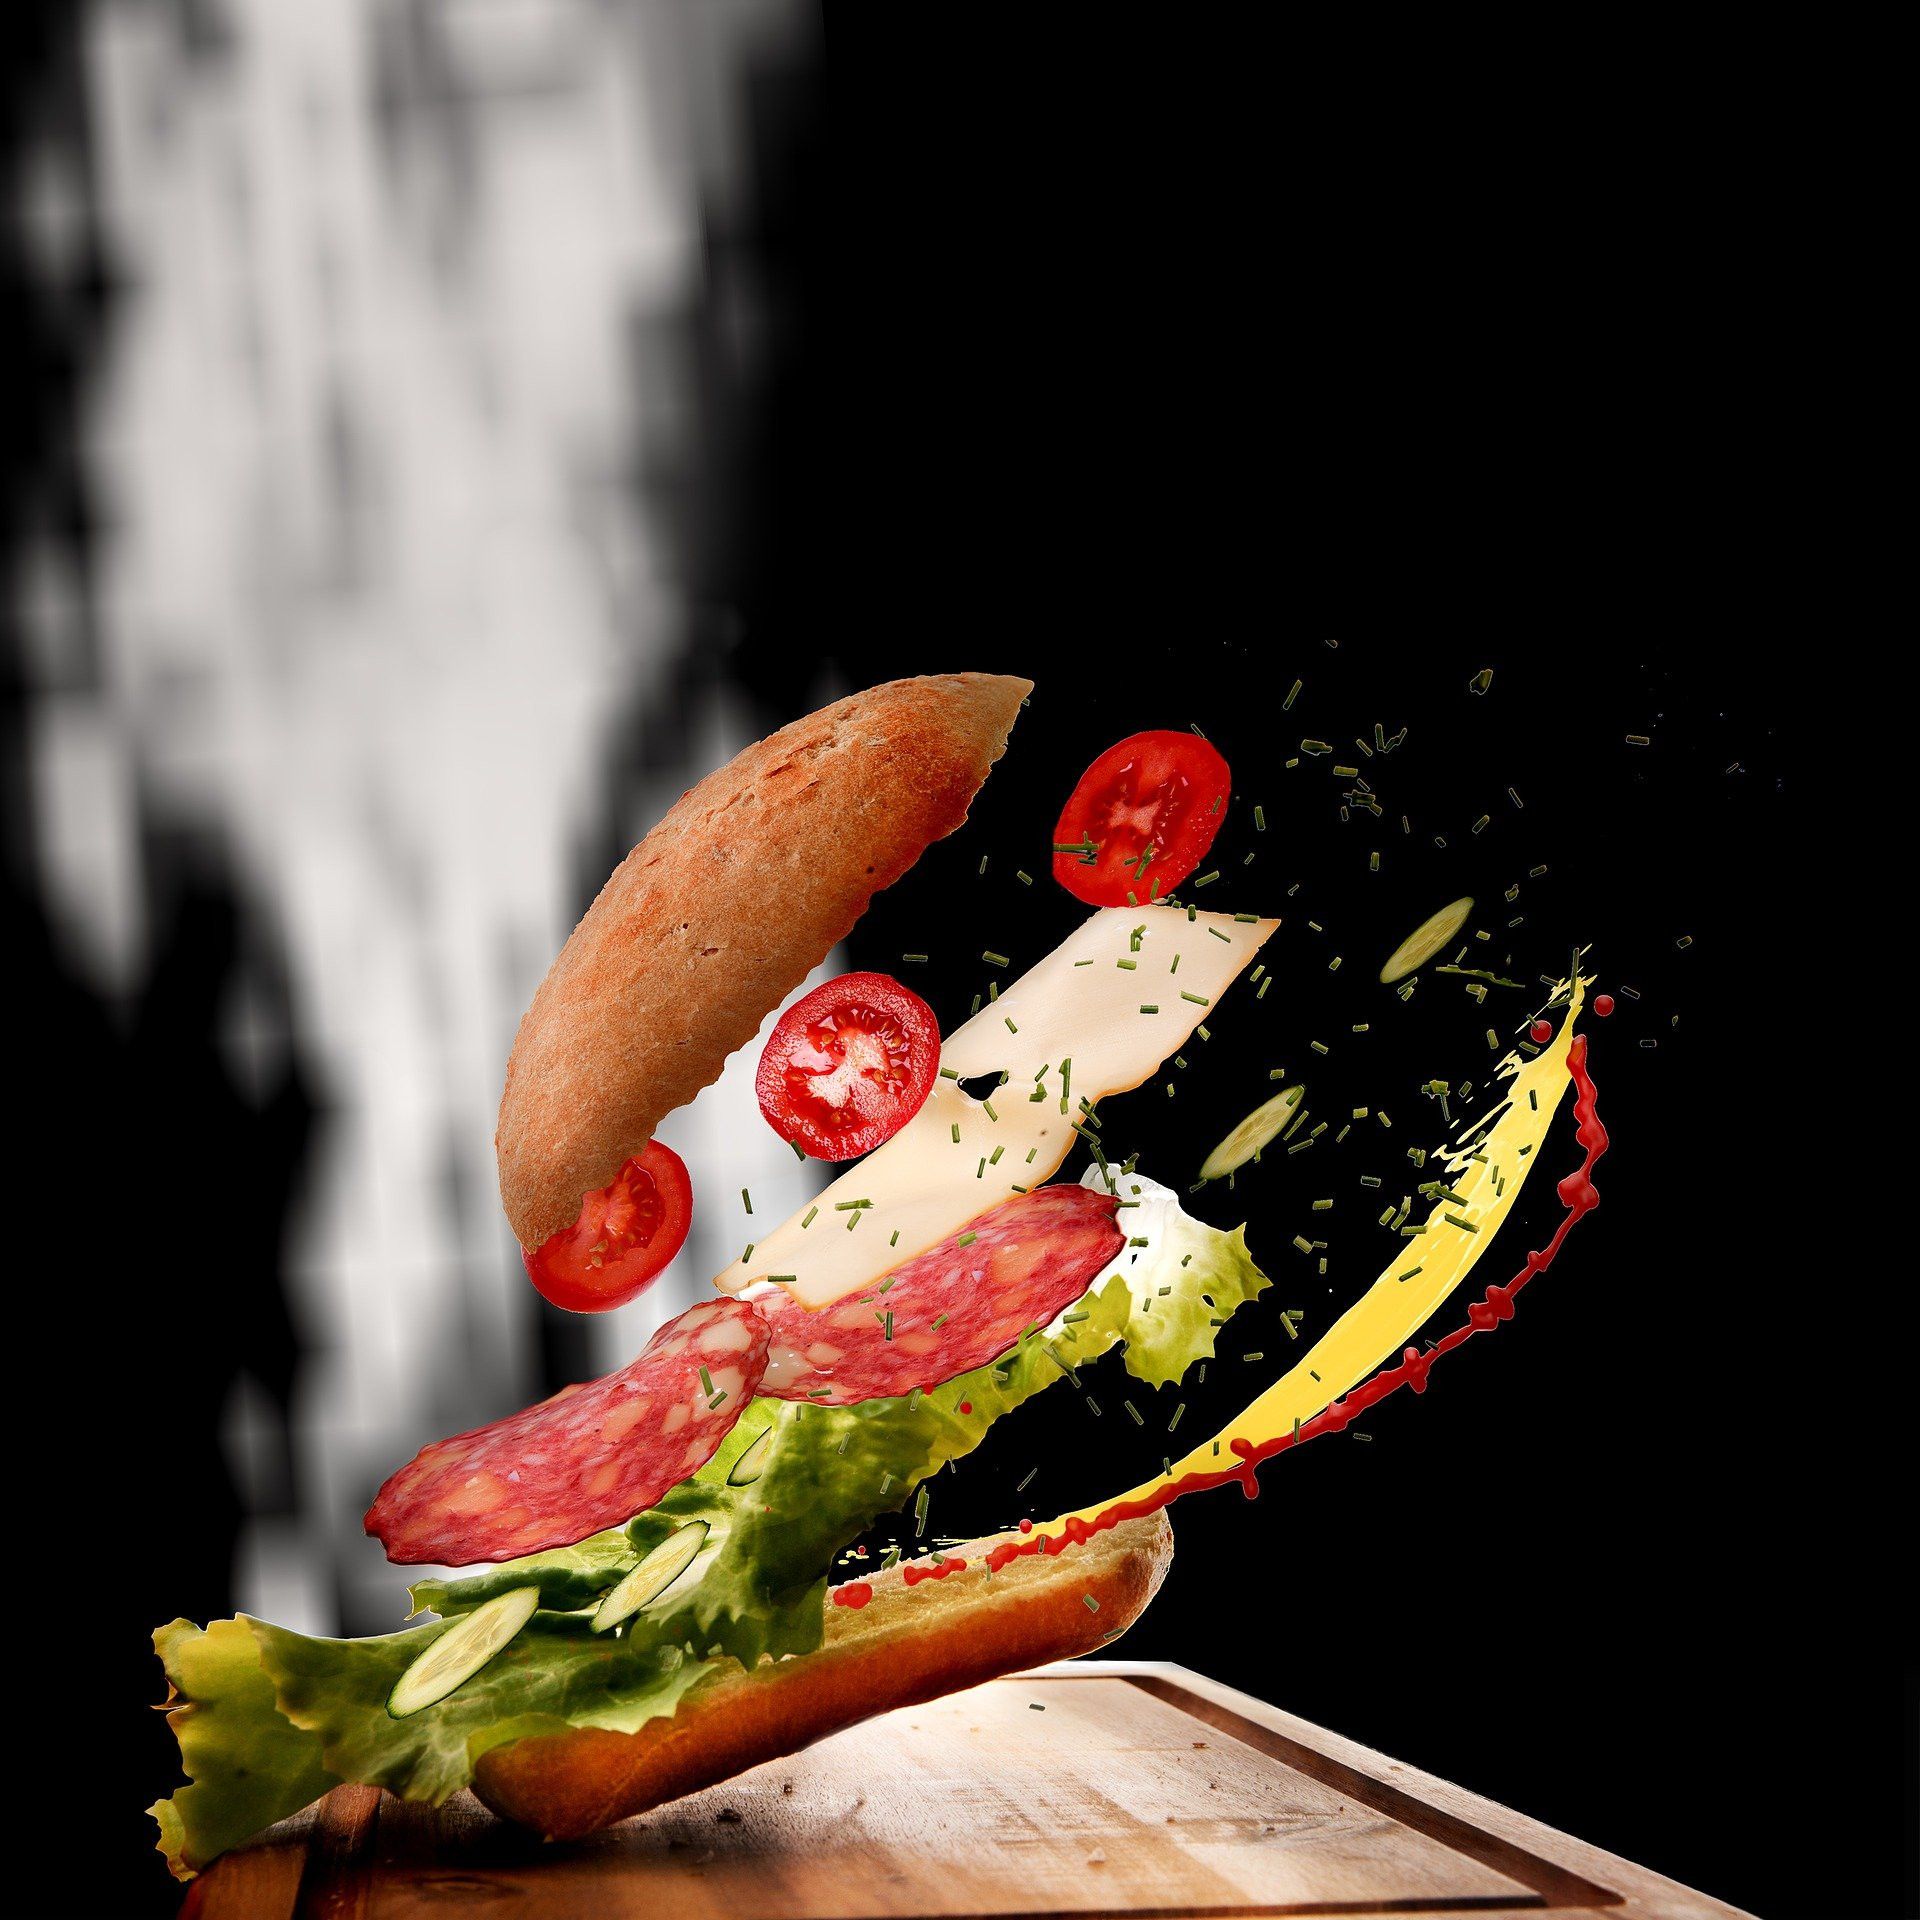 A delicious burger with flying ingredients on a black background - Food